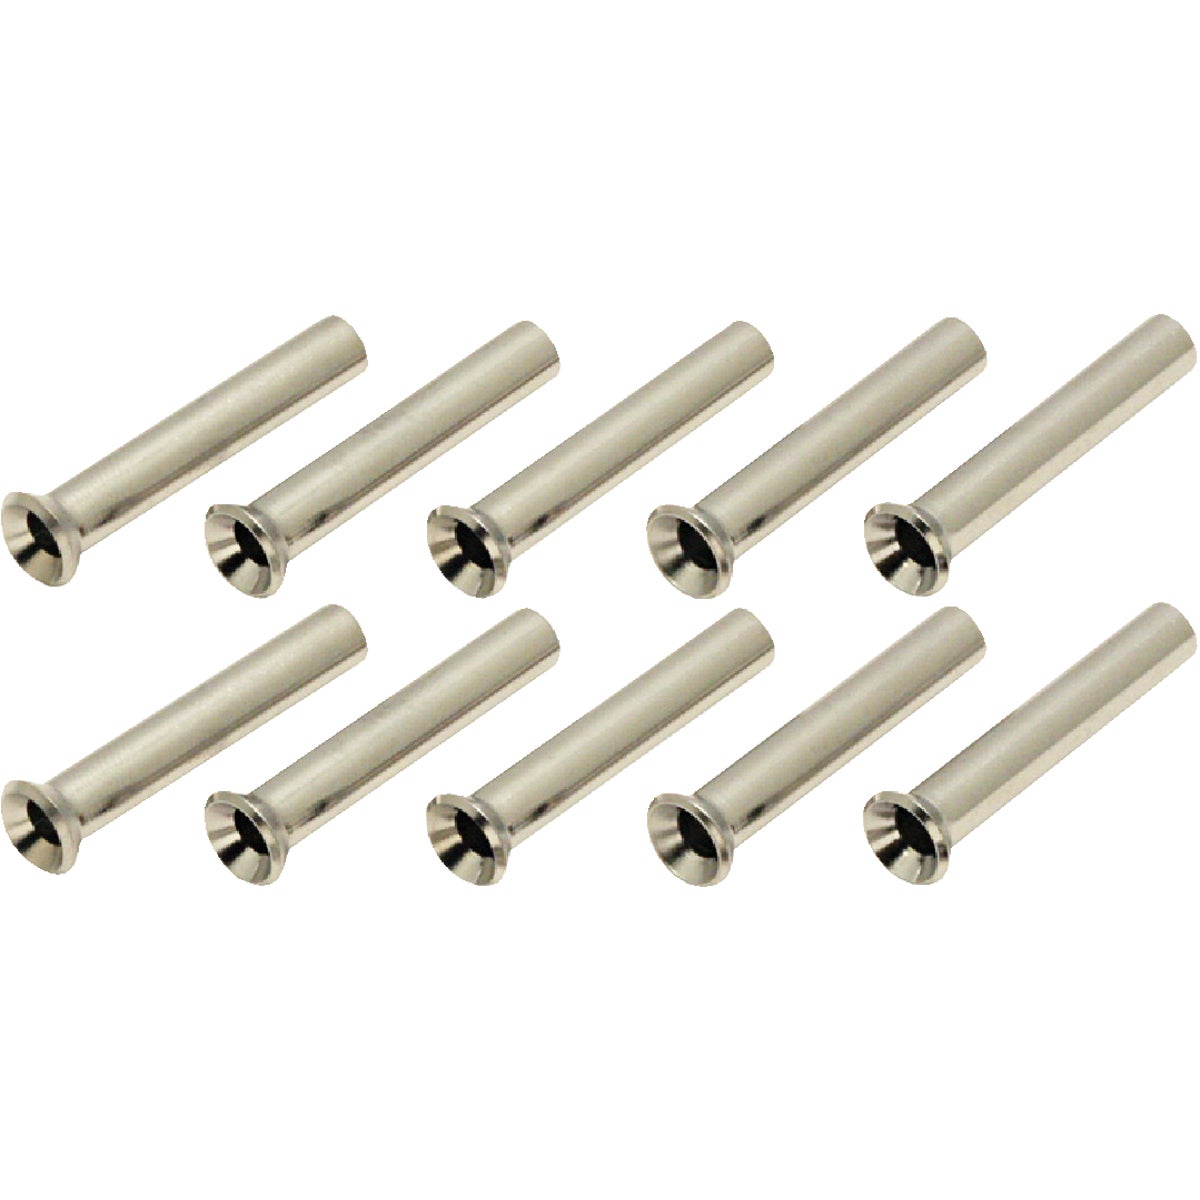 Atlantis Rail System RailEasy 5/32 In. Stainless Steel Cable Sleeve (10- Pack)